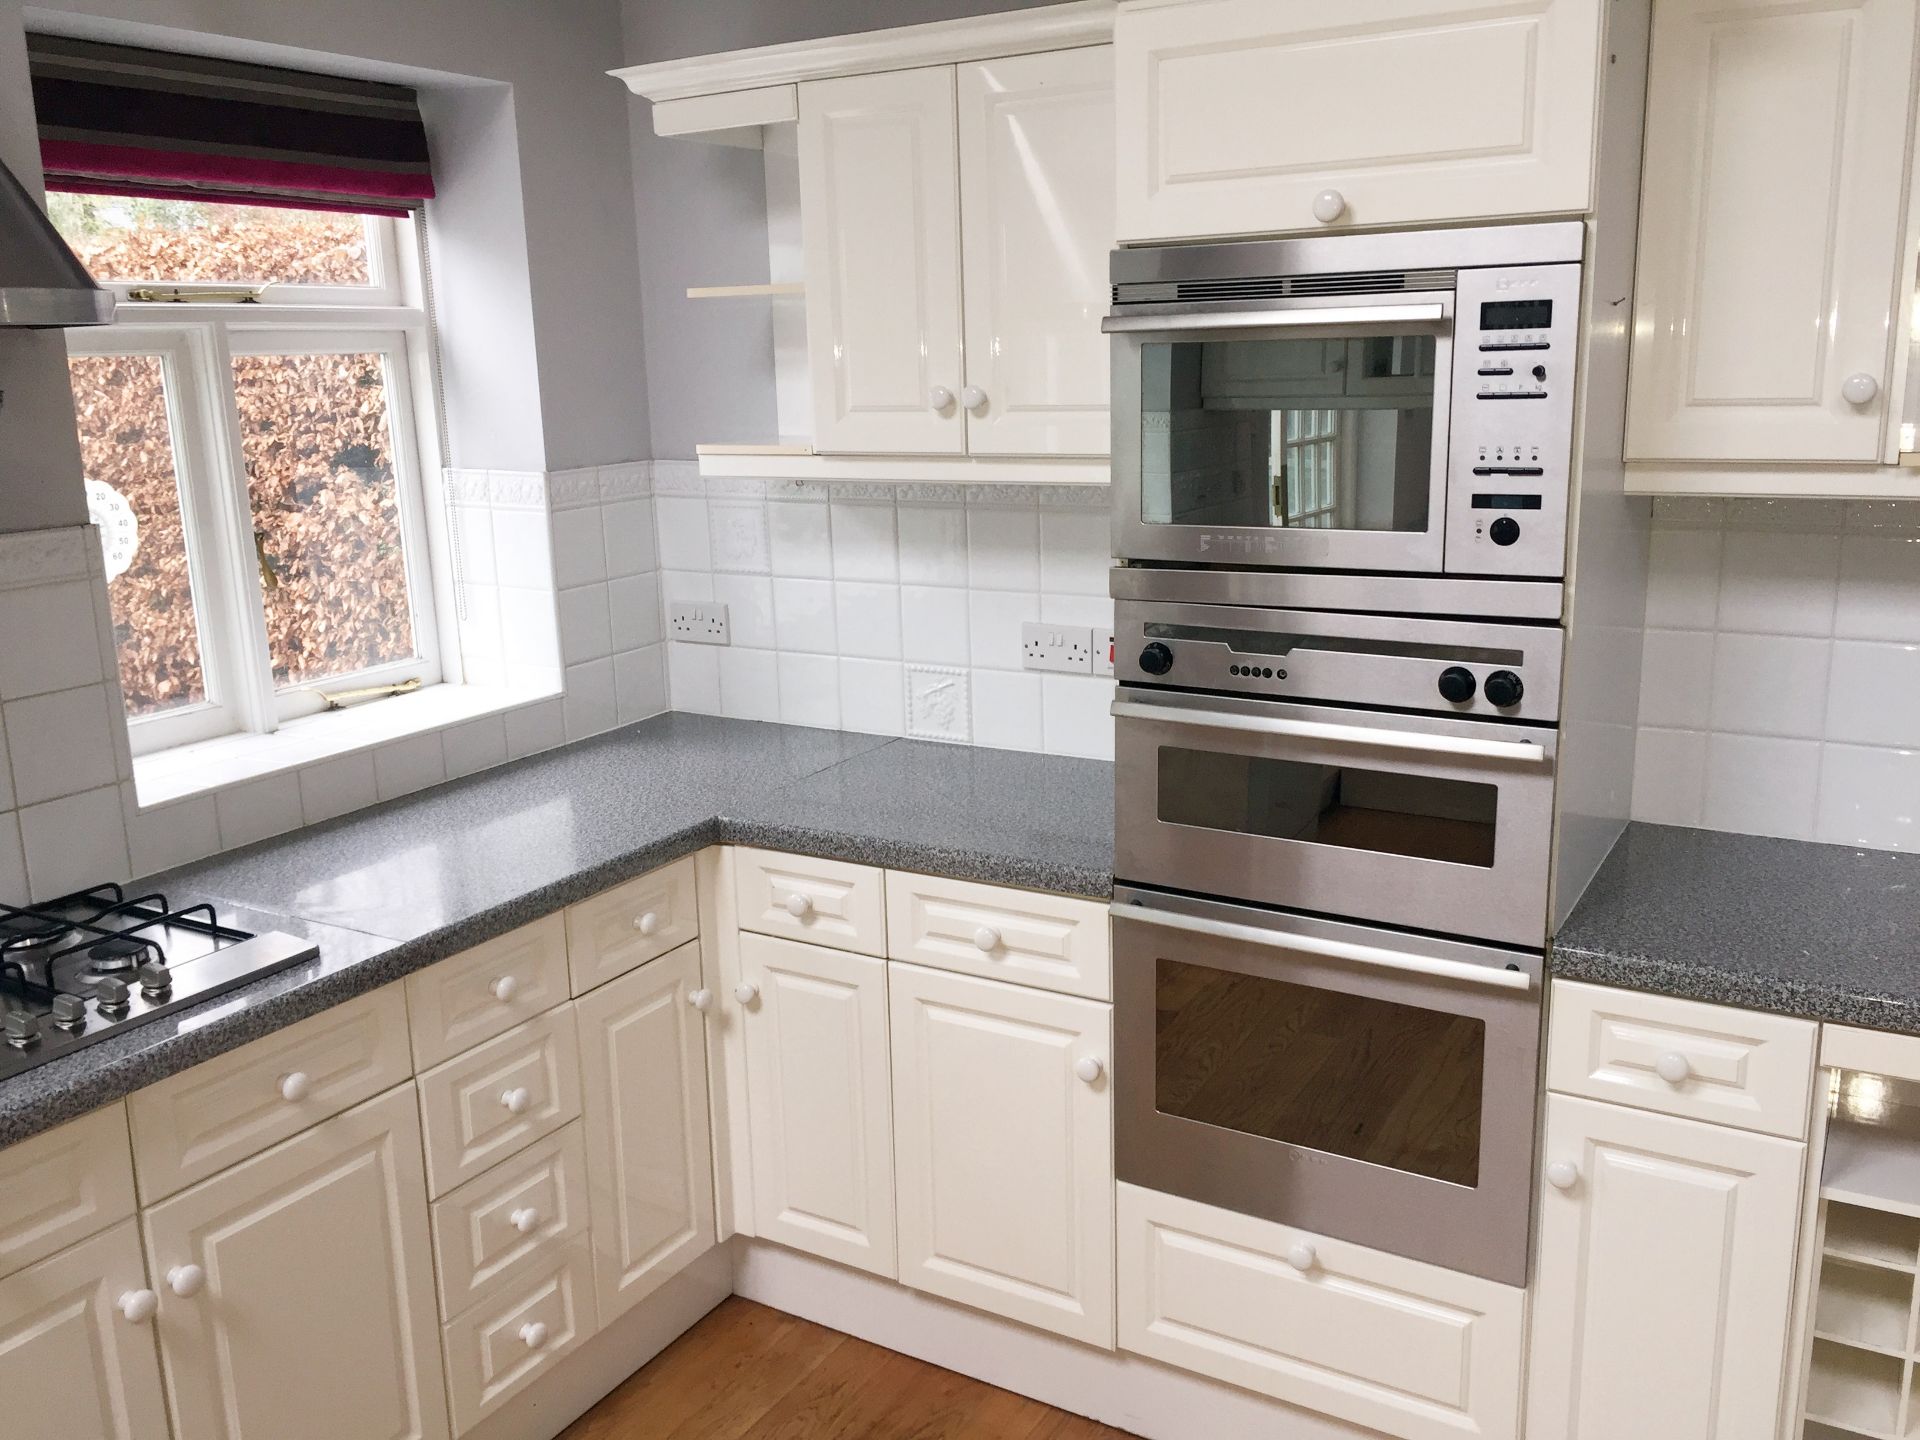 **JUST ADDED** 1 x Spacious Bespoke Fitted Kitchen In Cream With Neff And Whirlpool Appliances - - Image 12 of 37